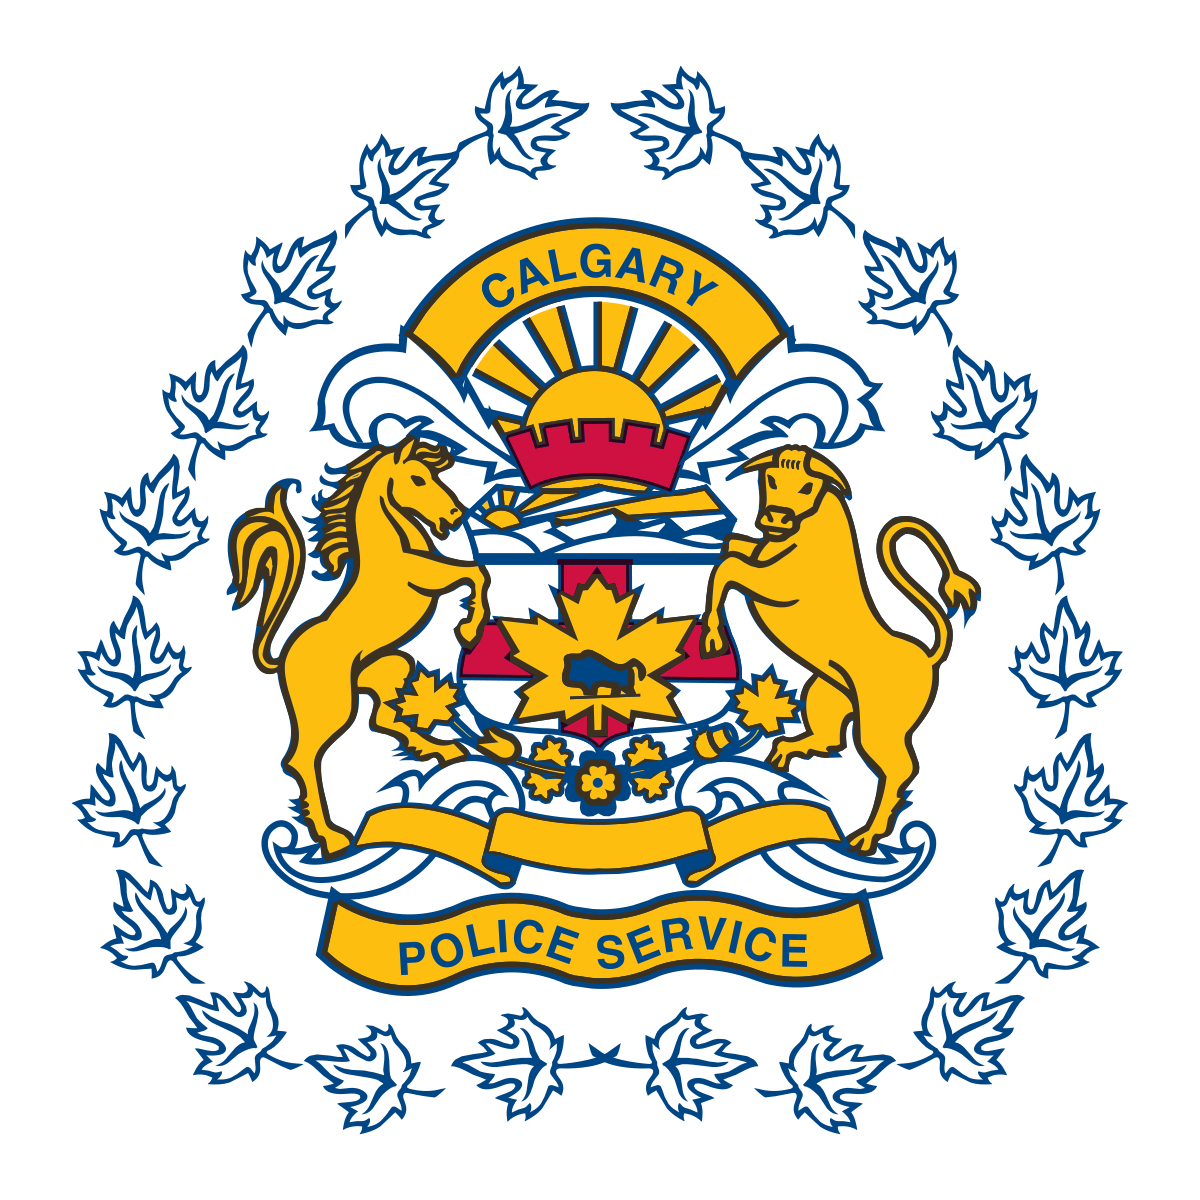 Calgary police service wikipedia. Indian clipart constable